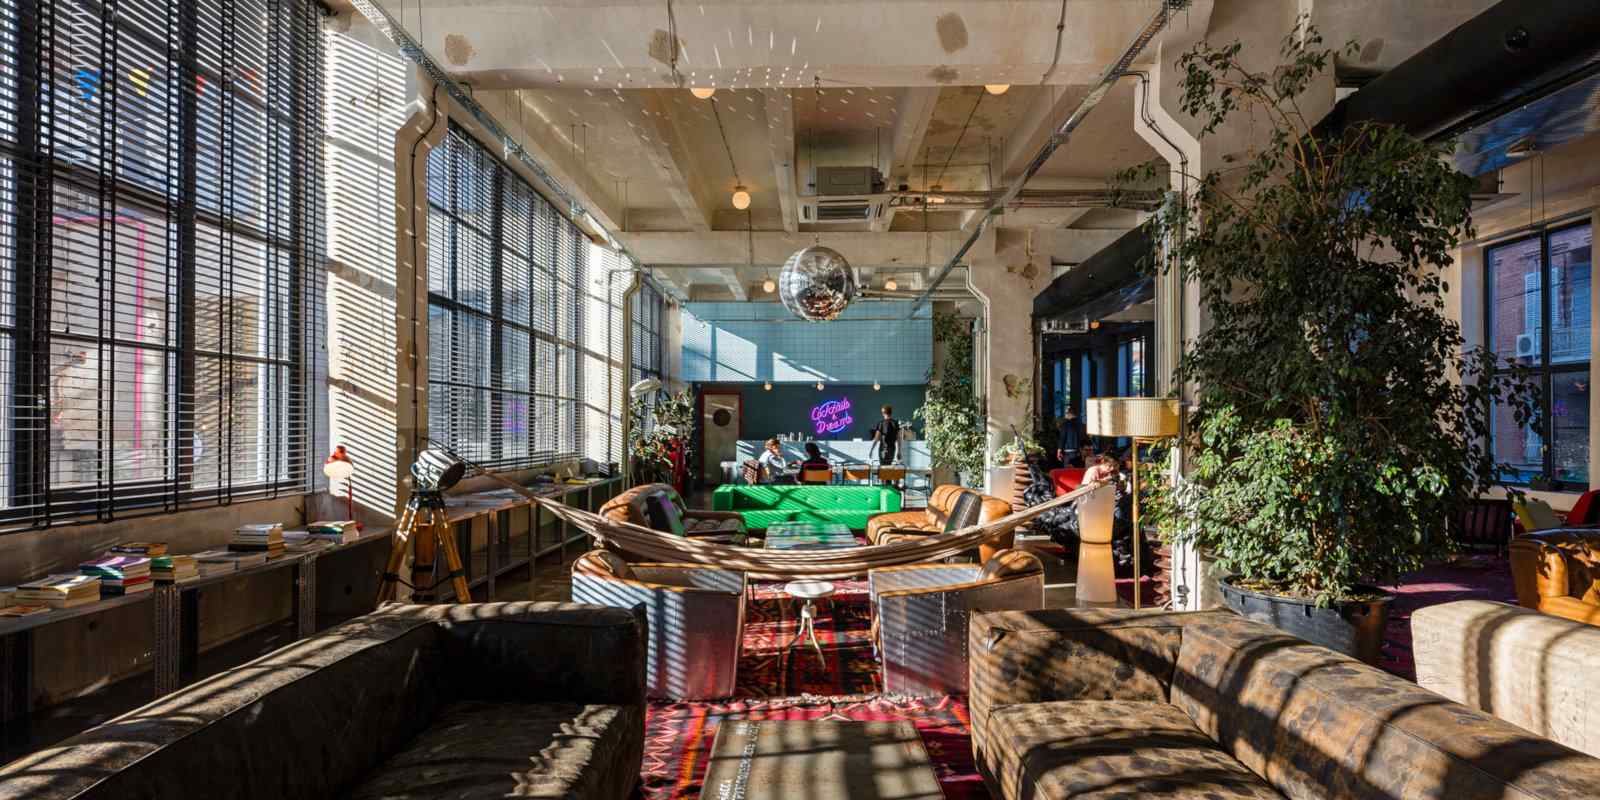 Gay travel to Tbilisi - Fabrika Hostel is a really cool hostel in an old Soviet factory